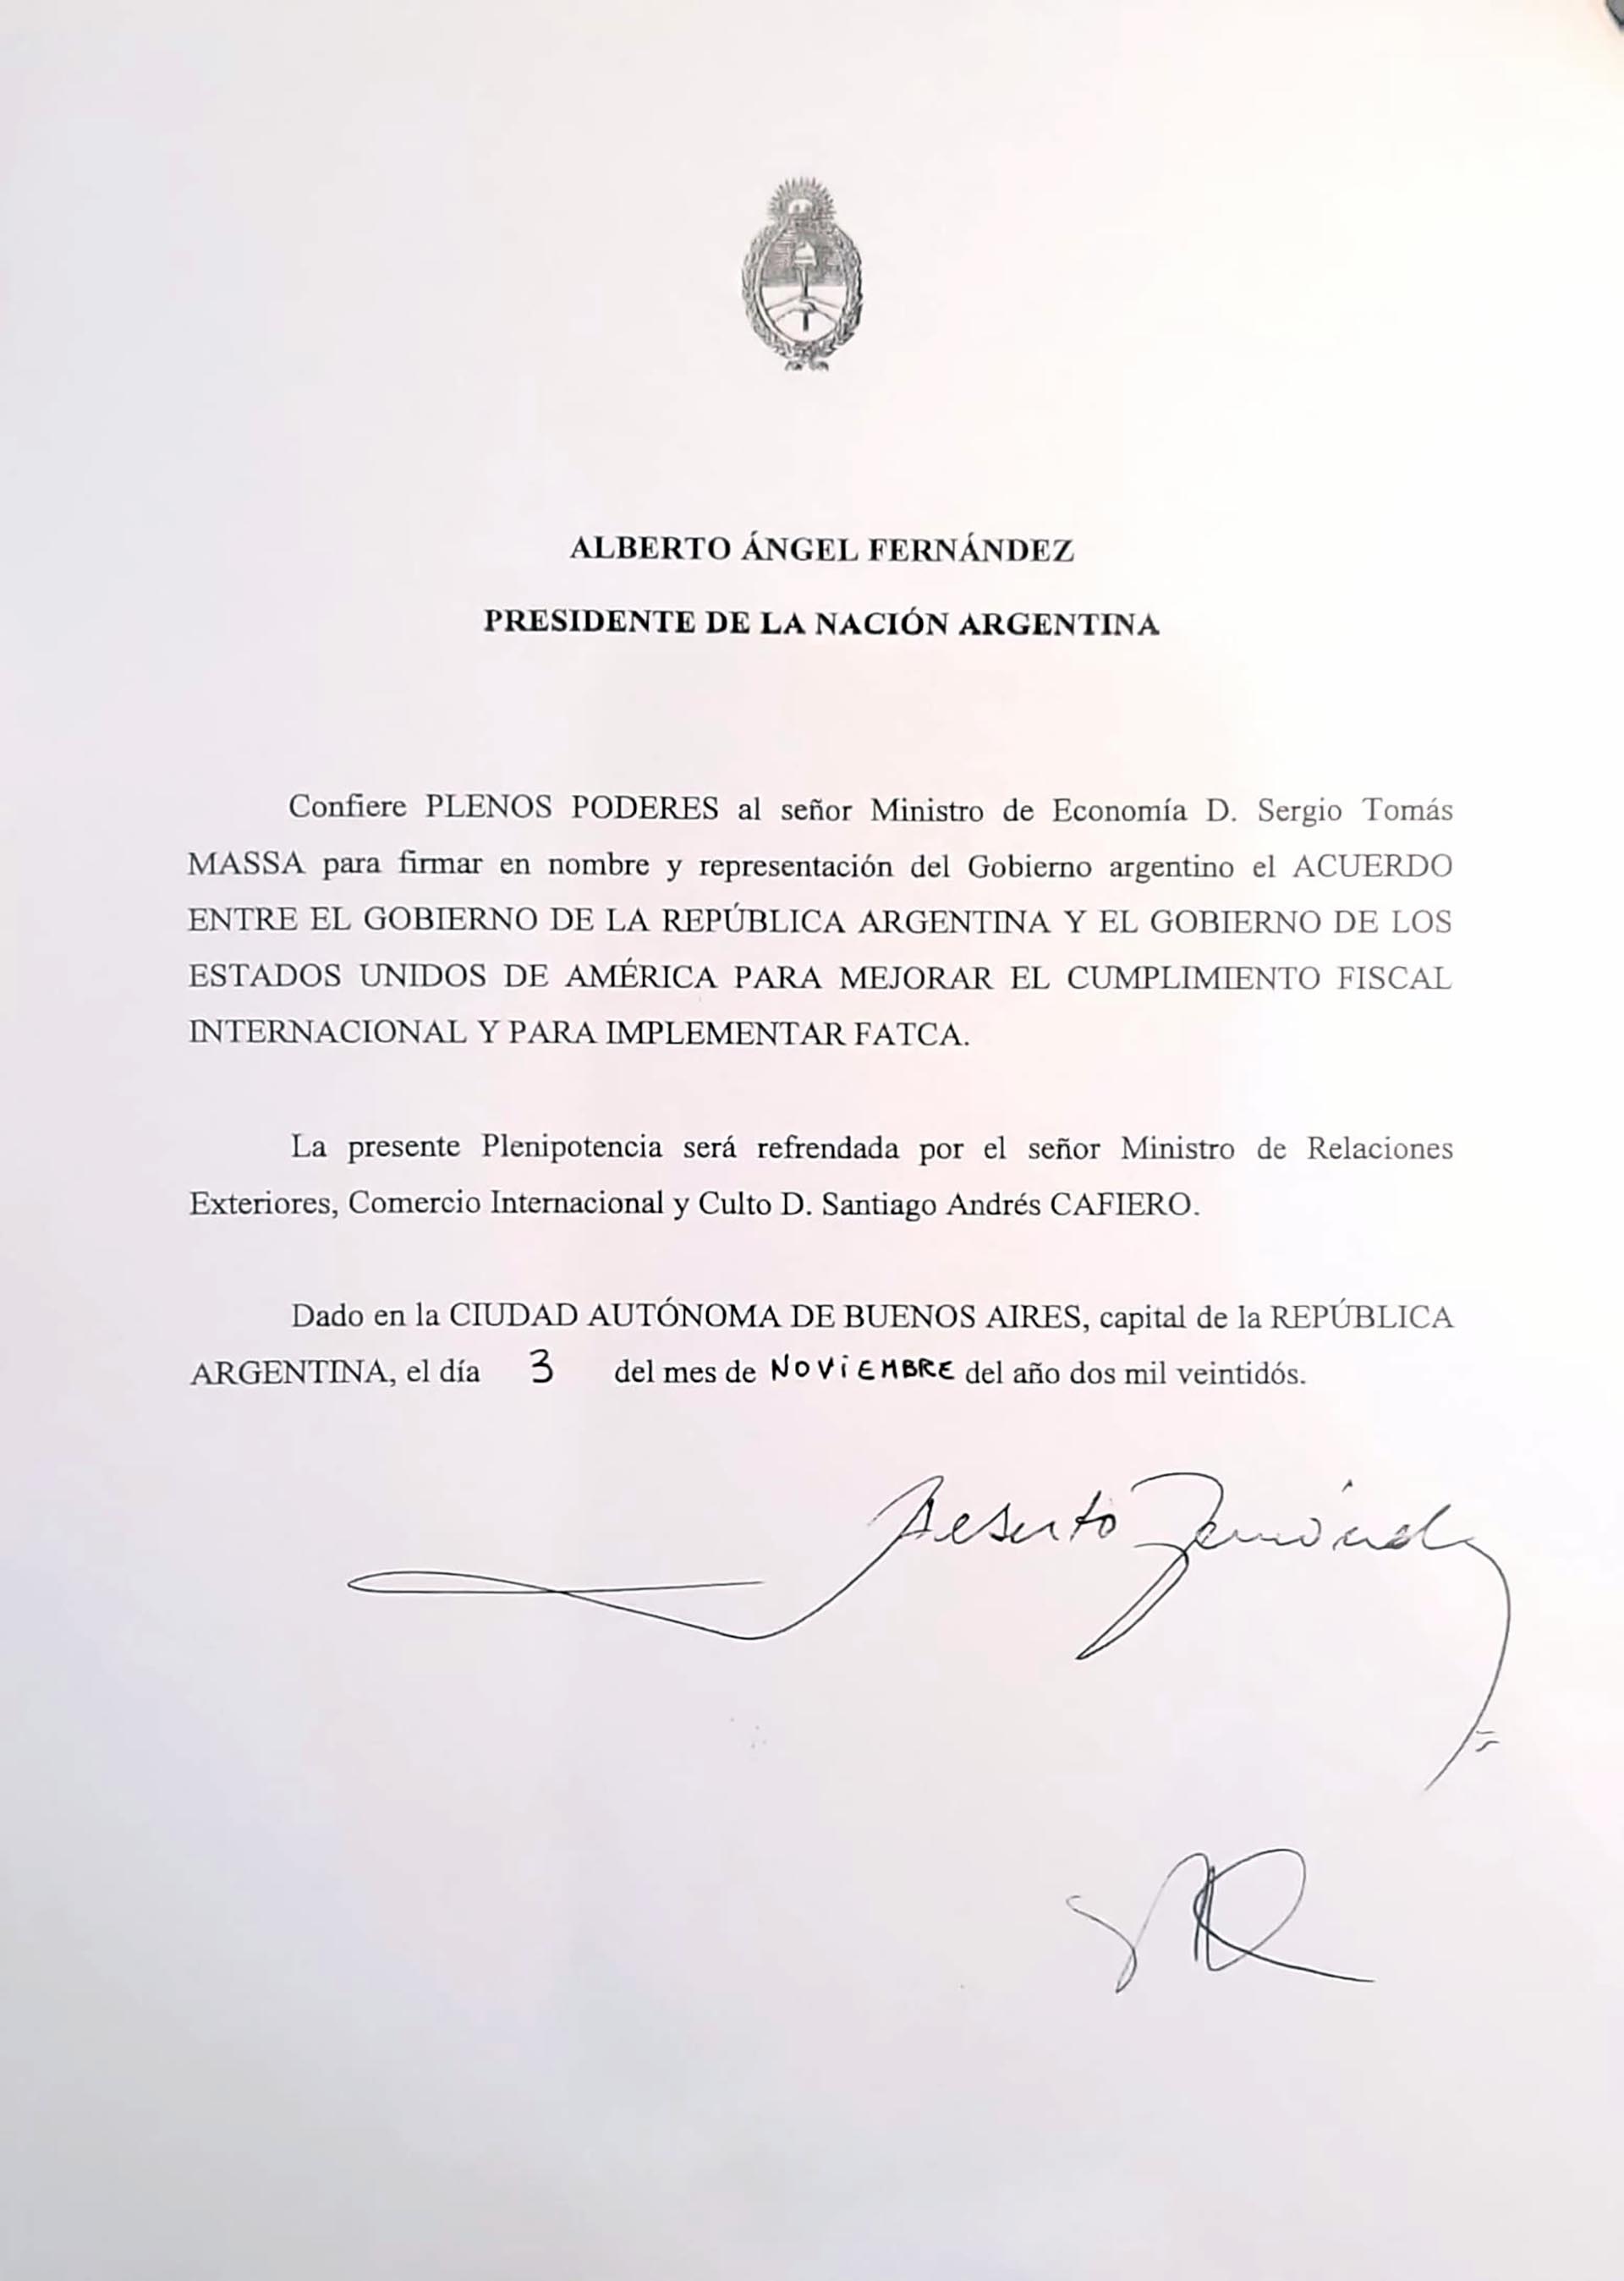 A document giving Massa full powers to sign the contract